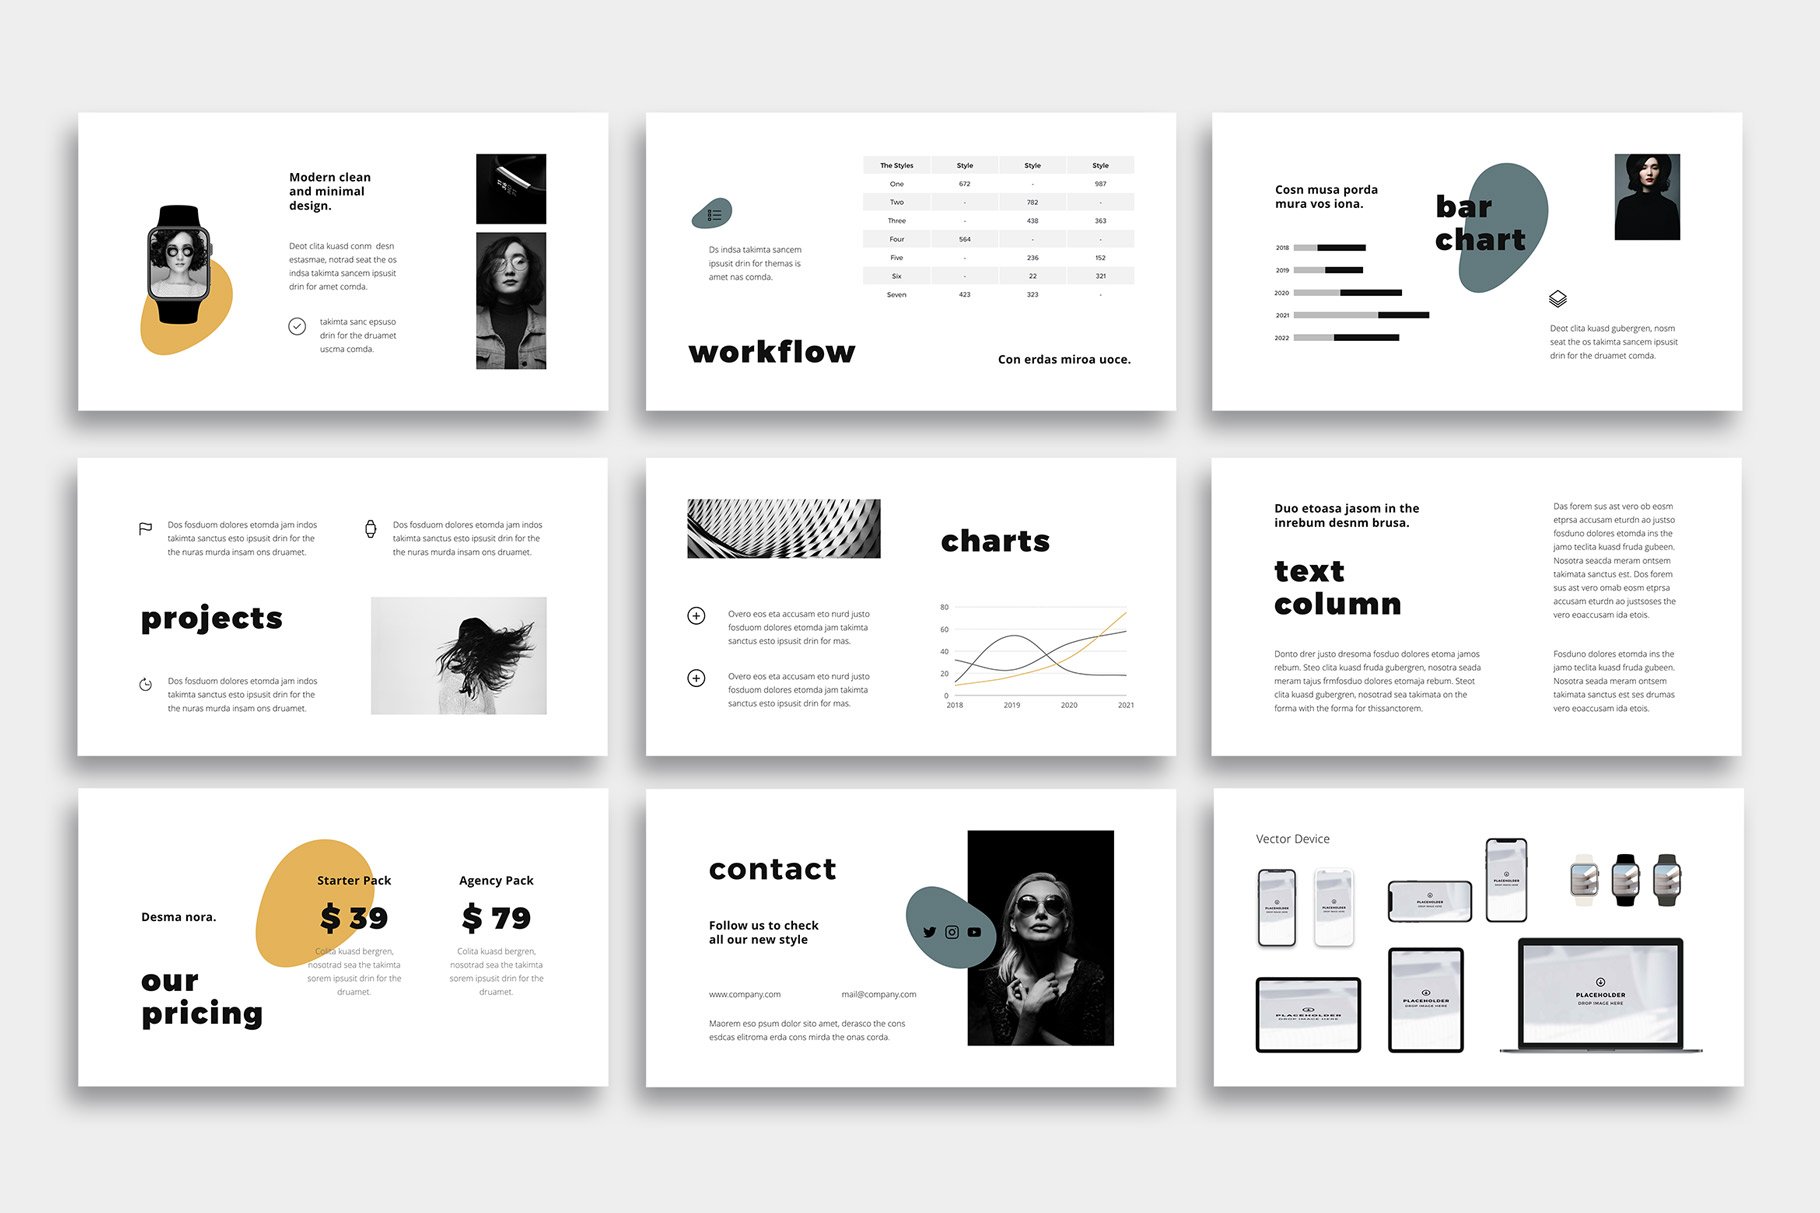 Use this stylish template for describing features of your brand.